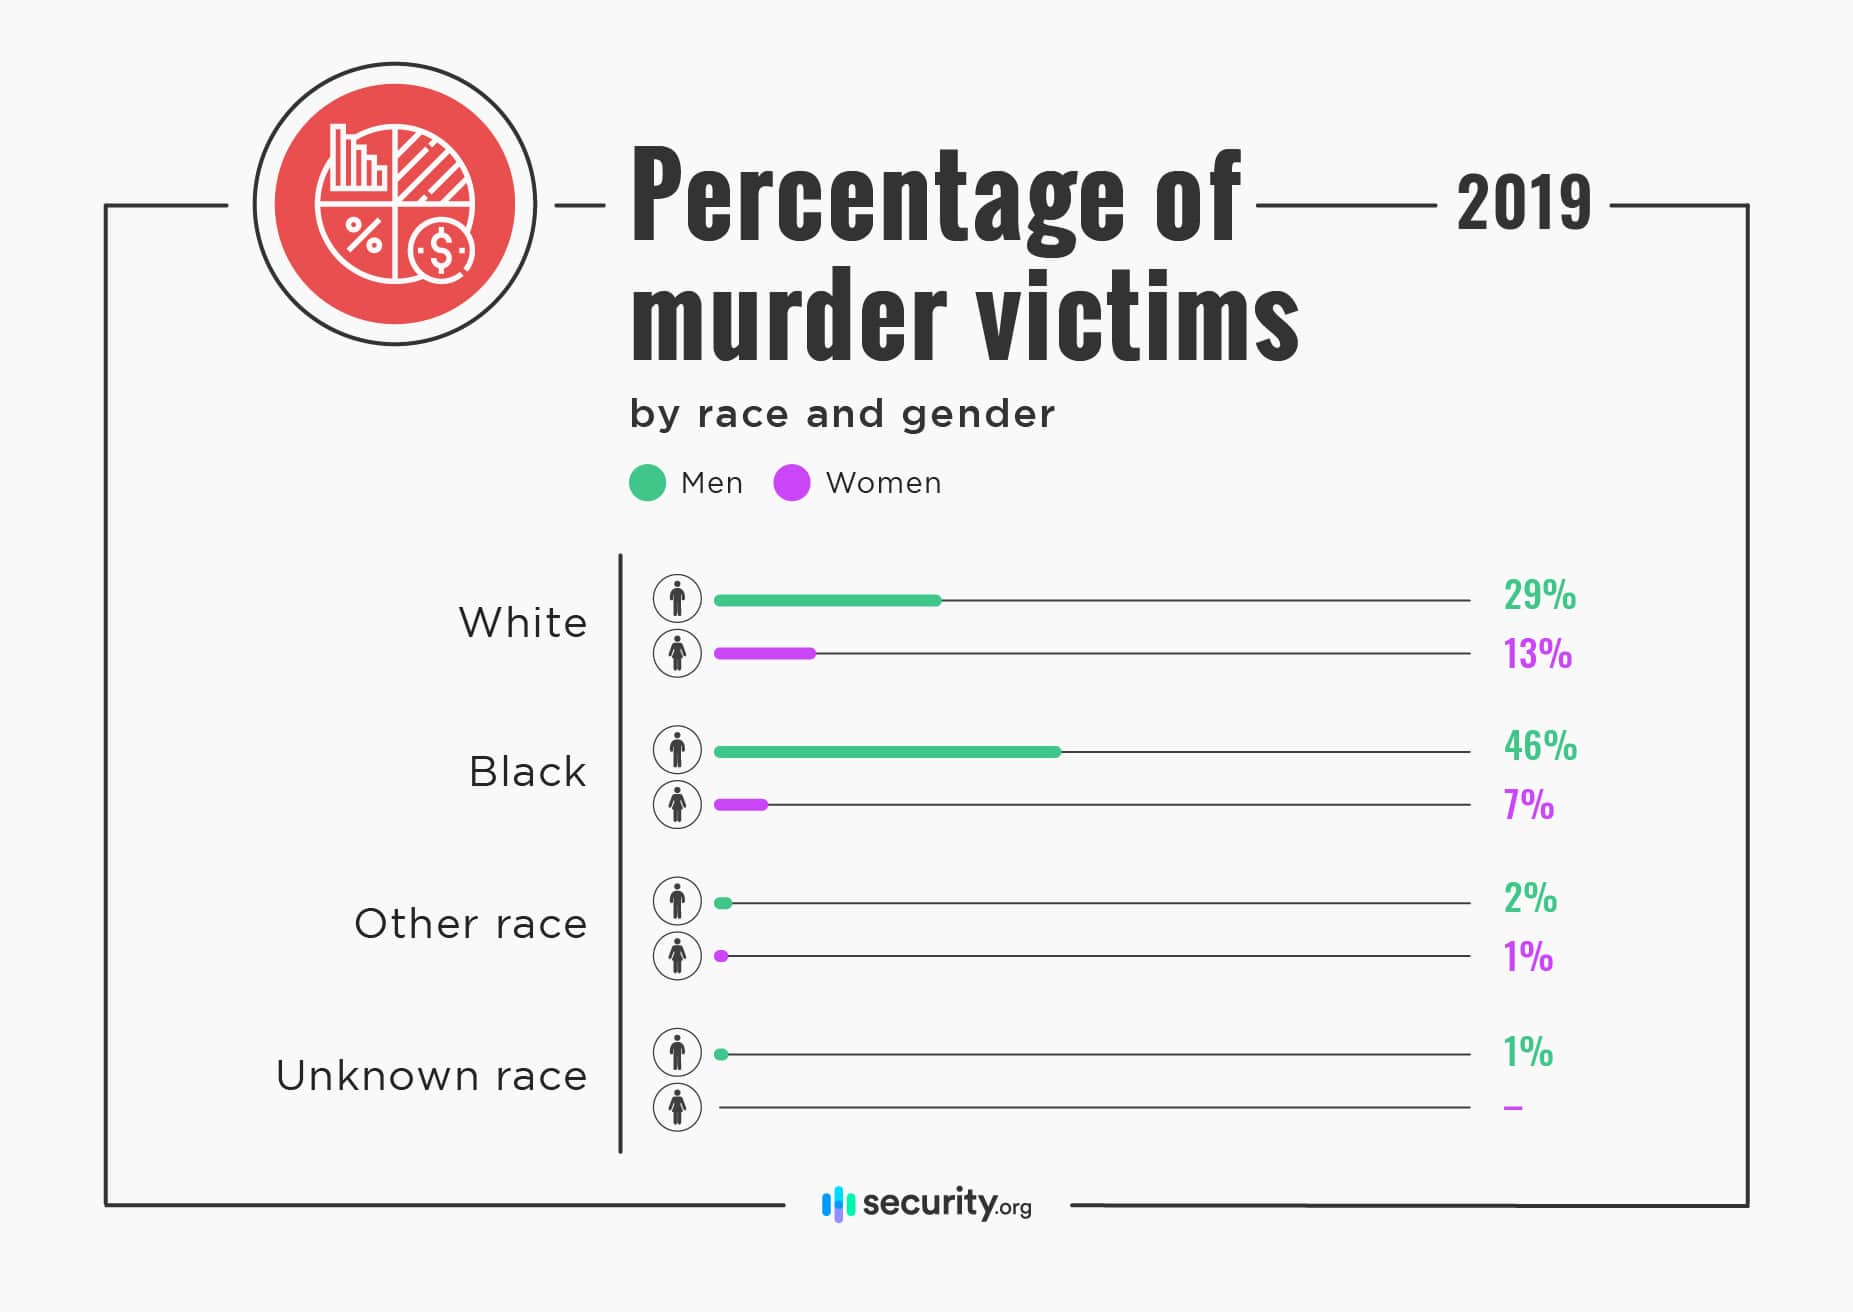 Percentage of murder victims by race and gender in 2019